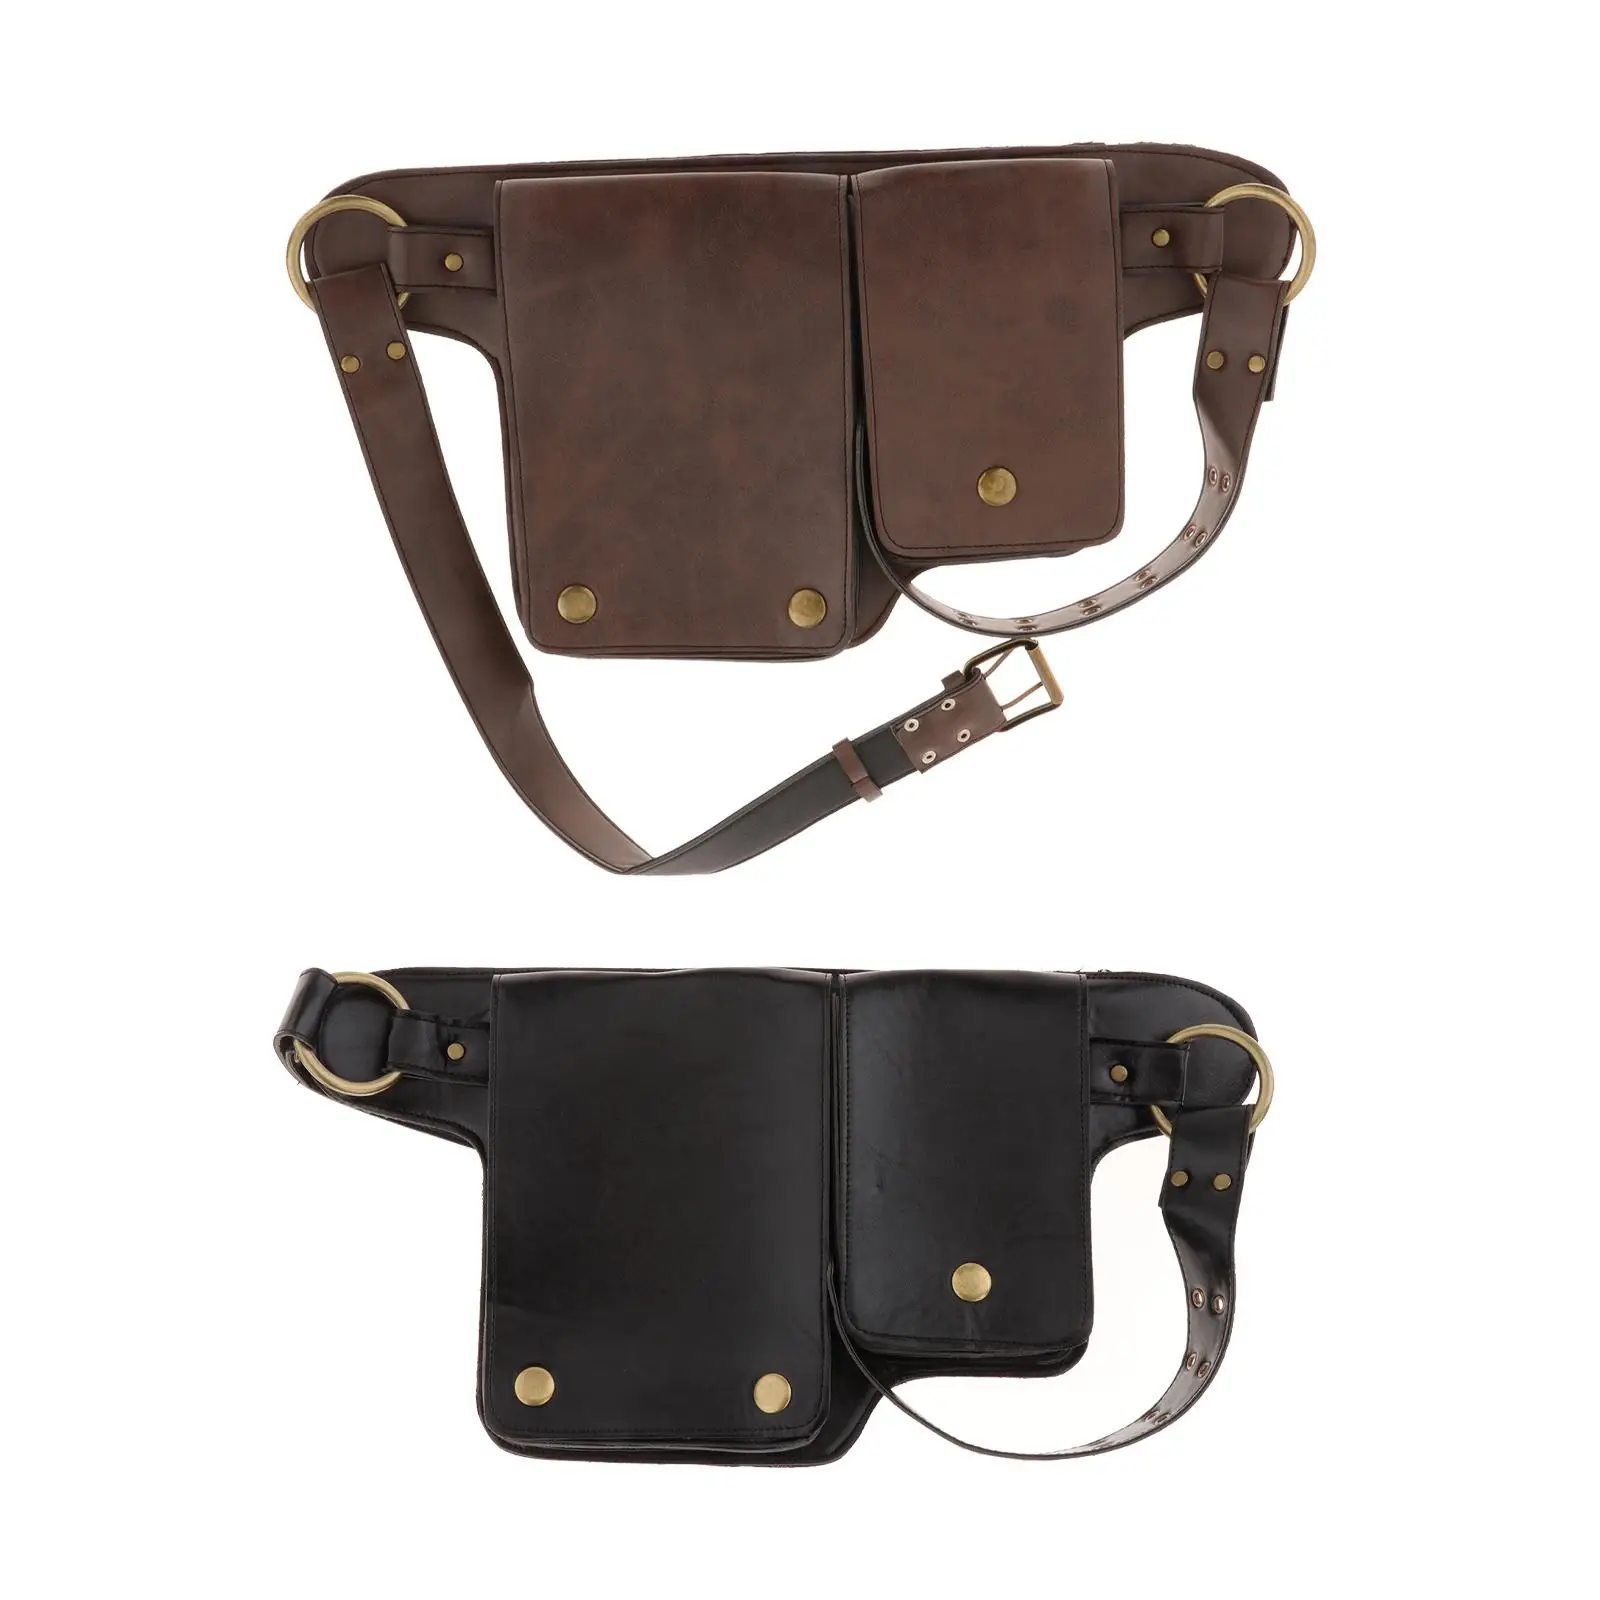 PU Leather Waist Belt Pouch Fannypack Purse Vintage Style Medieval Waist Pocket Fanny Pack for Roleplaying Cosplay